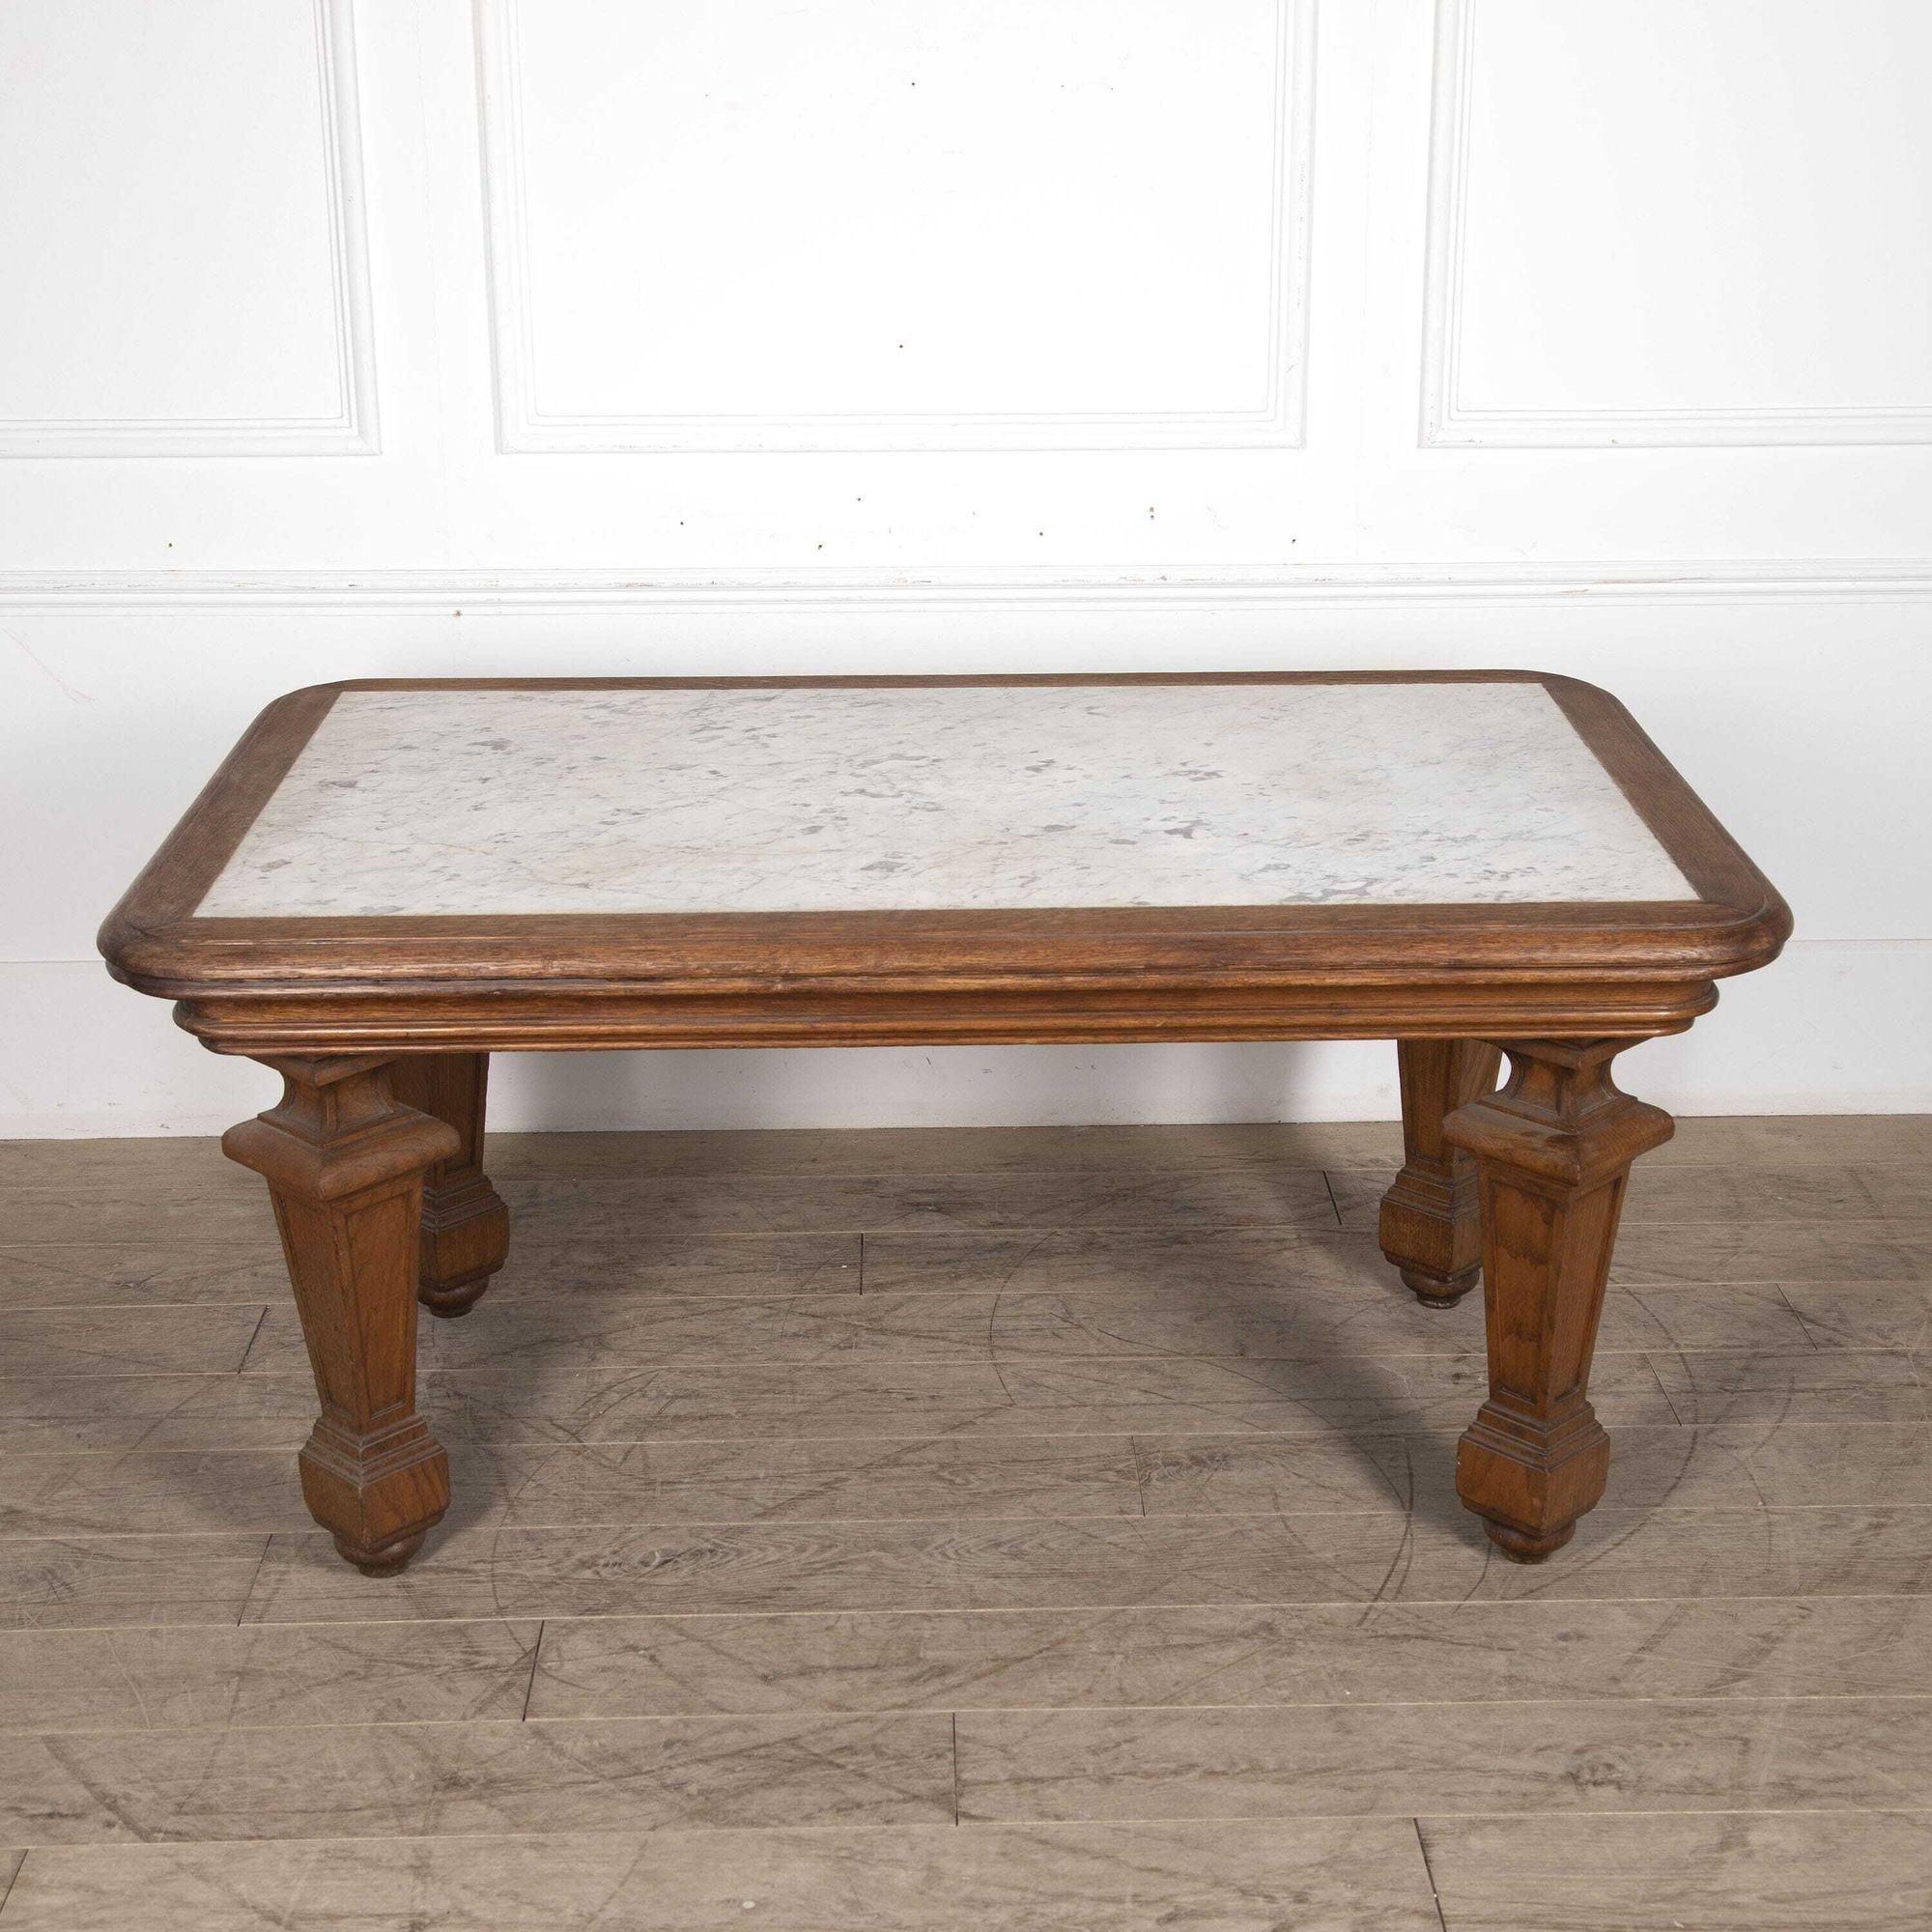 20th century Marble-topped French baker's table.
Dating from the early 20th century, this French oak baker's table has an inset marble top with moulded frieze supported on robust square tapered legs with block feet set at an angle.
This table